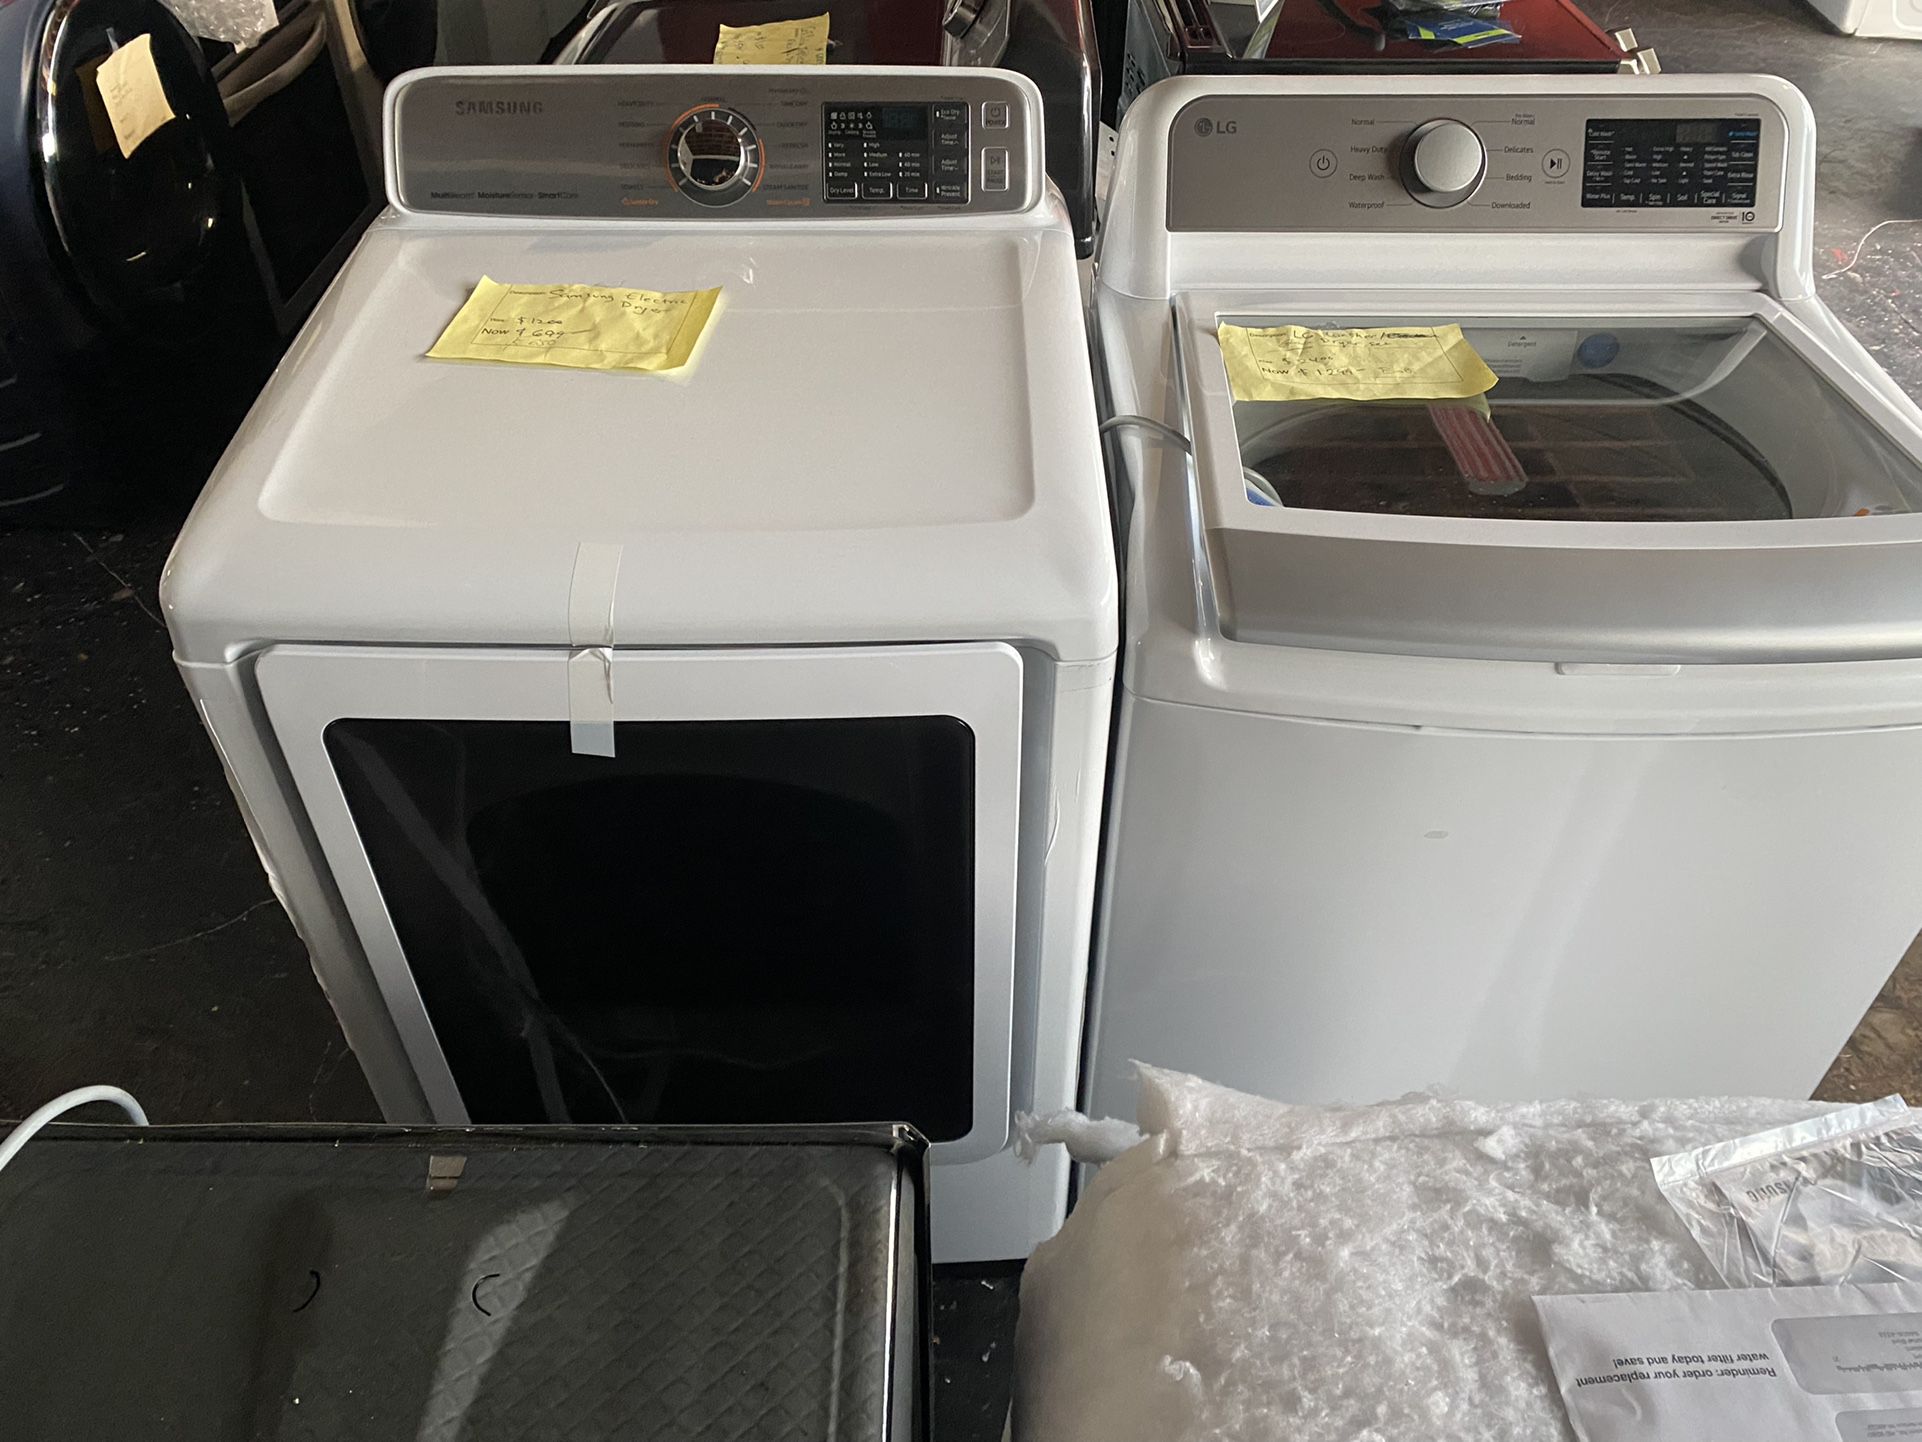 New LG Washer And Samsung Electric Dryer 